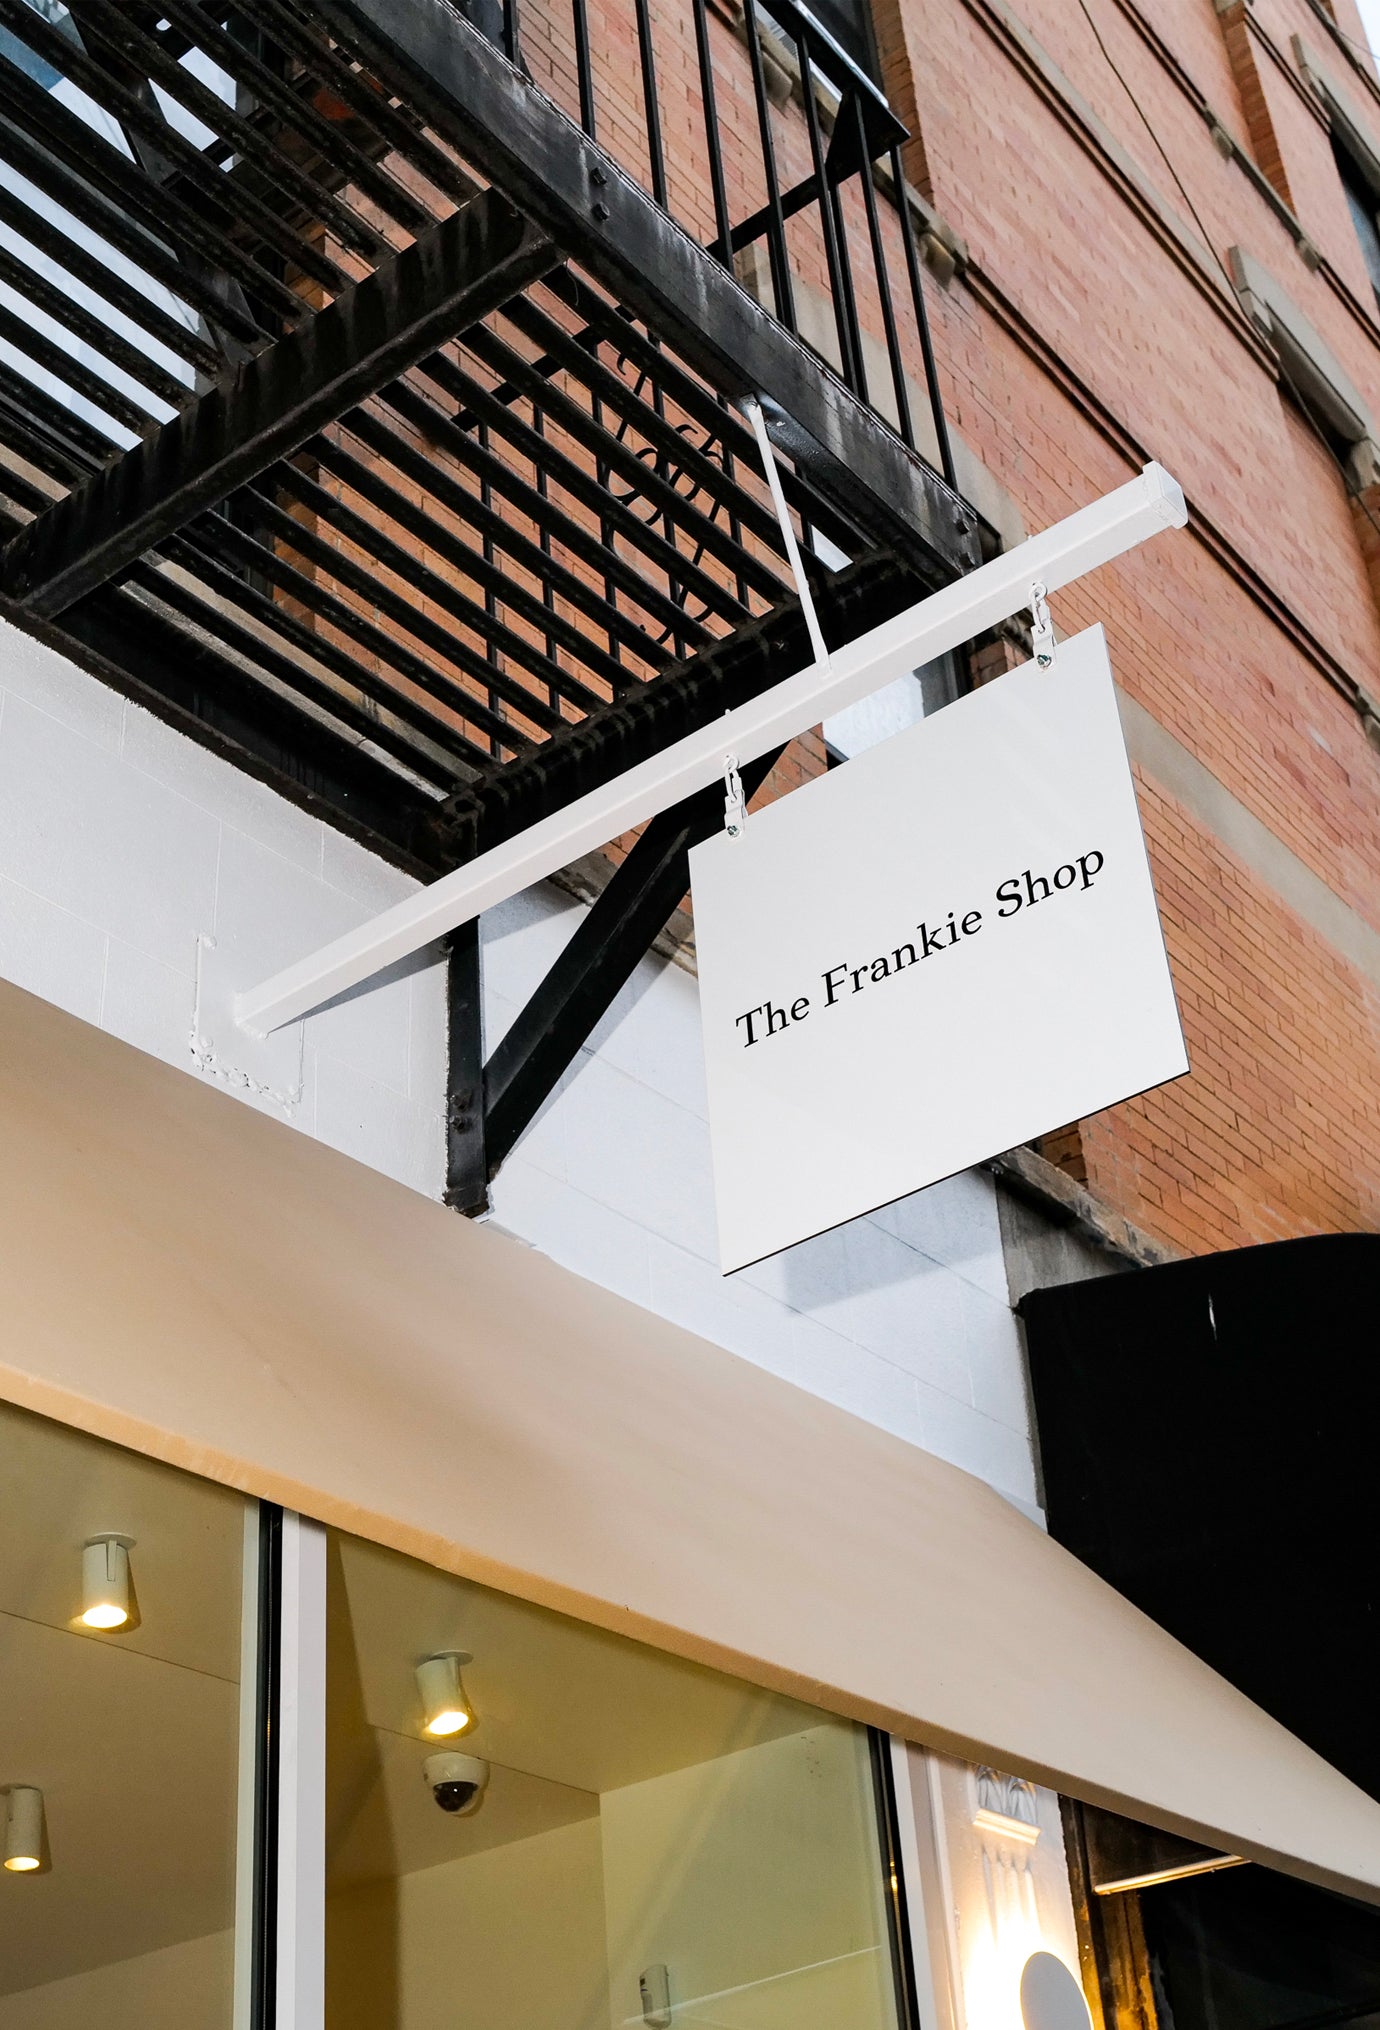 We’re back on the Lower East Side – Frankie Shop Europe